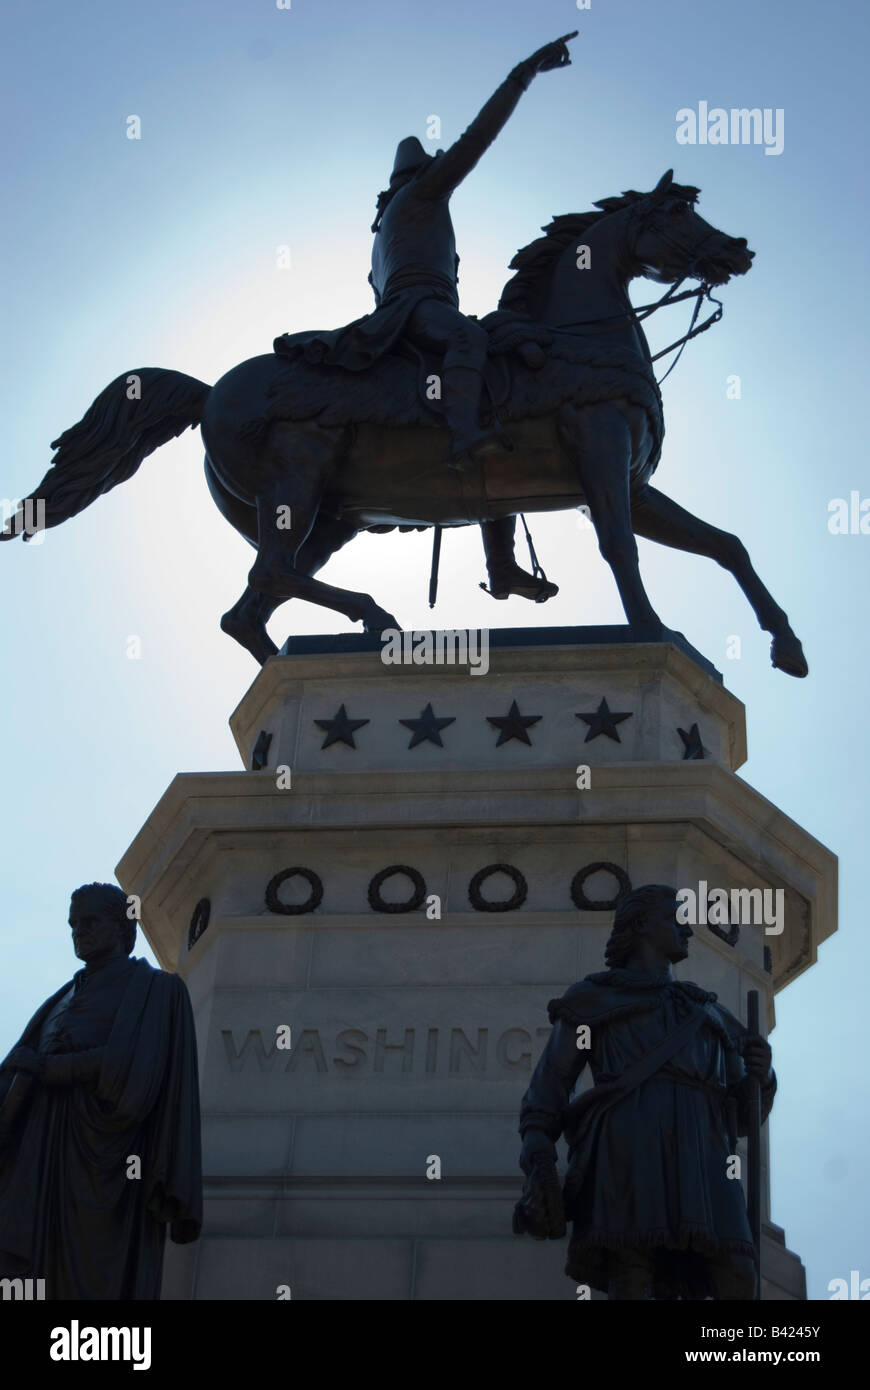 The George Washington equestrian monument in slight silhouette. On grounds of the Virginia State Capitol. Stock Photo